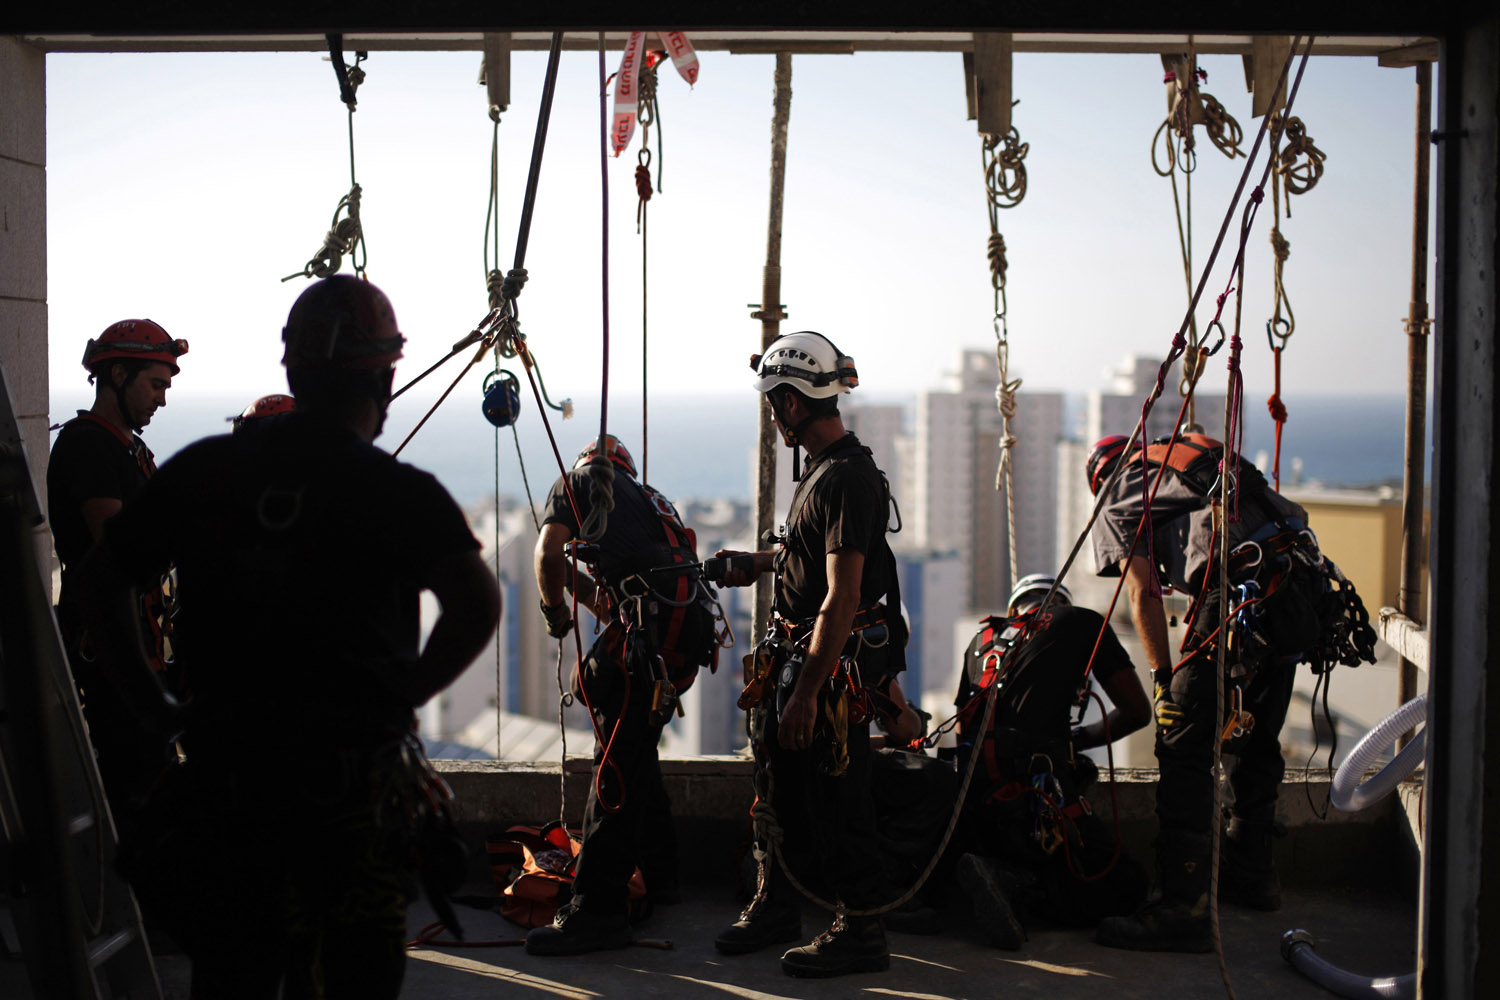 Aug. 20, 2012. Israeli firefighters prepare their gear before rappelling from a building as they take part in a drill with soldiers from the Home Front Command during a simulated missile attack on an apartment block, in the southern city of Ashkelon.